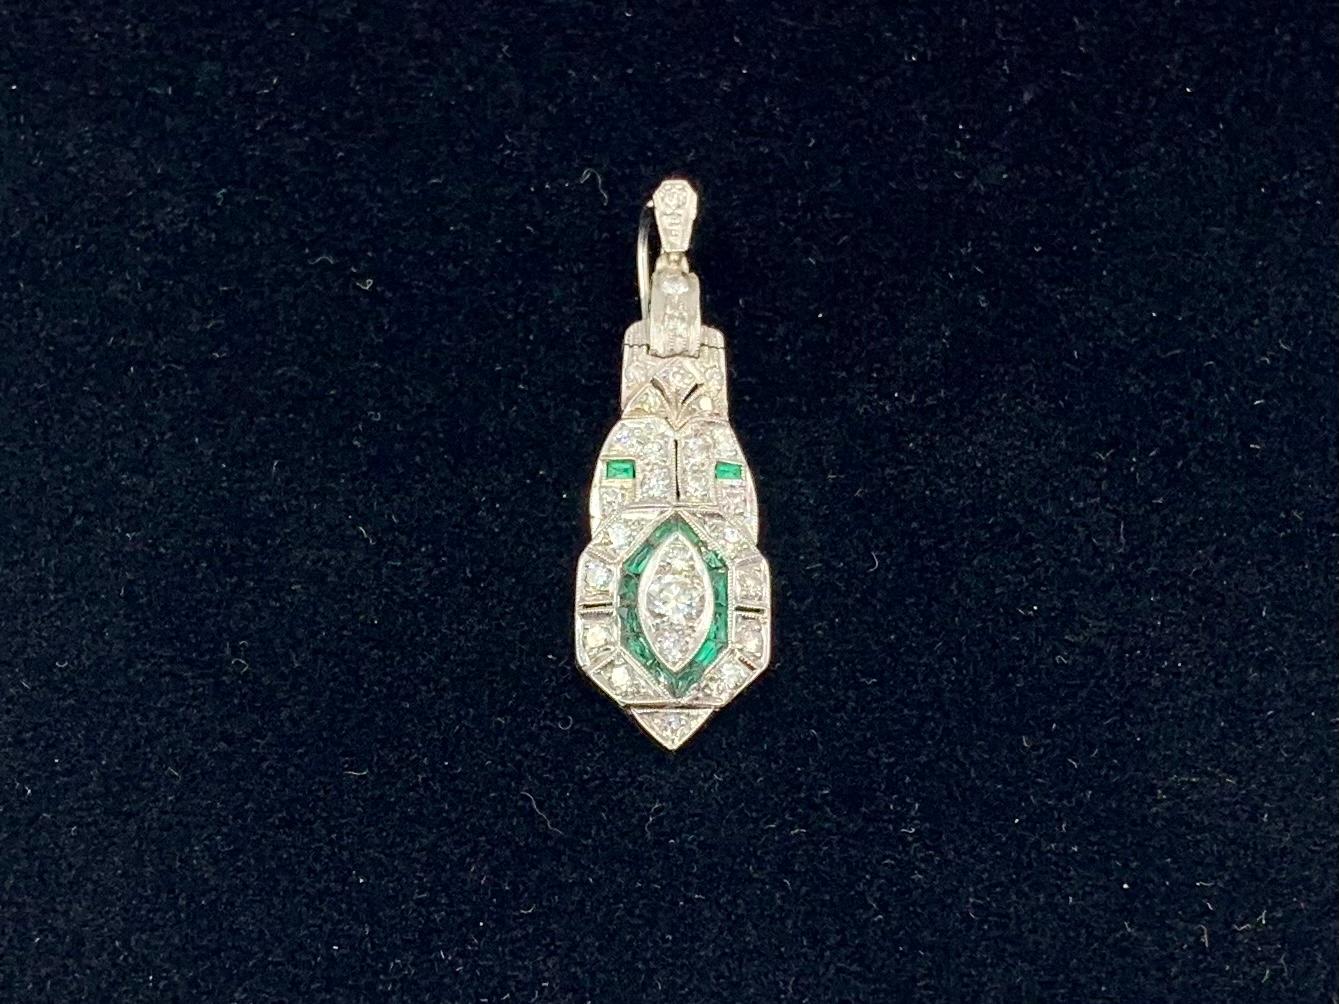 Interesting and distinctive estate Art Deco period platinum diamond and emerald pendant with a central design of a diamond eye framed by emeralds. The generous bale has an unusual feature of opening and closing which allows for wear on a wide ribbon